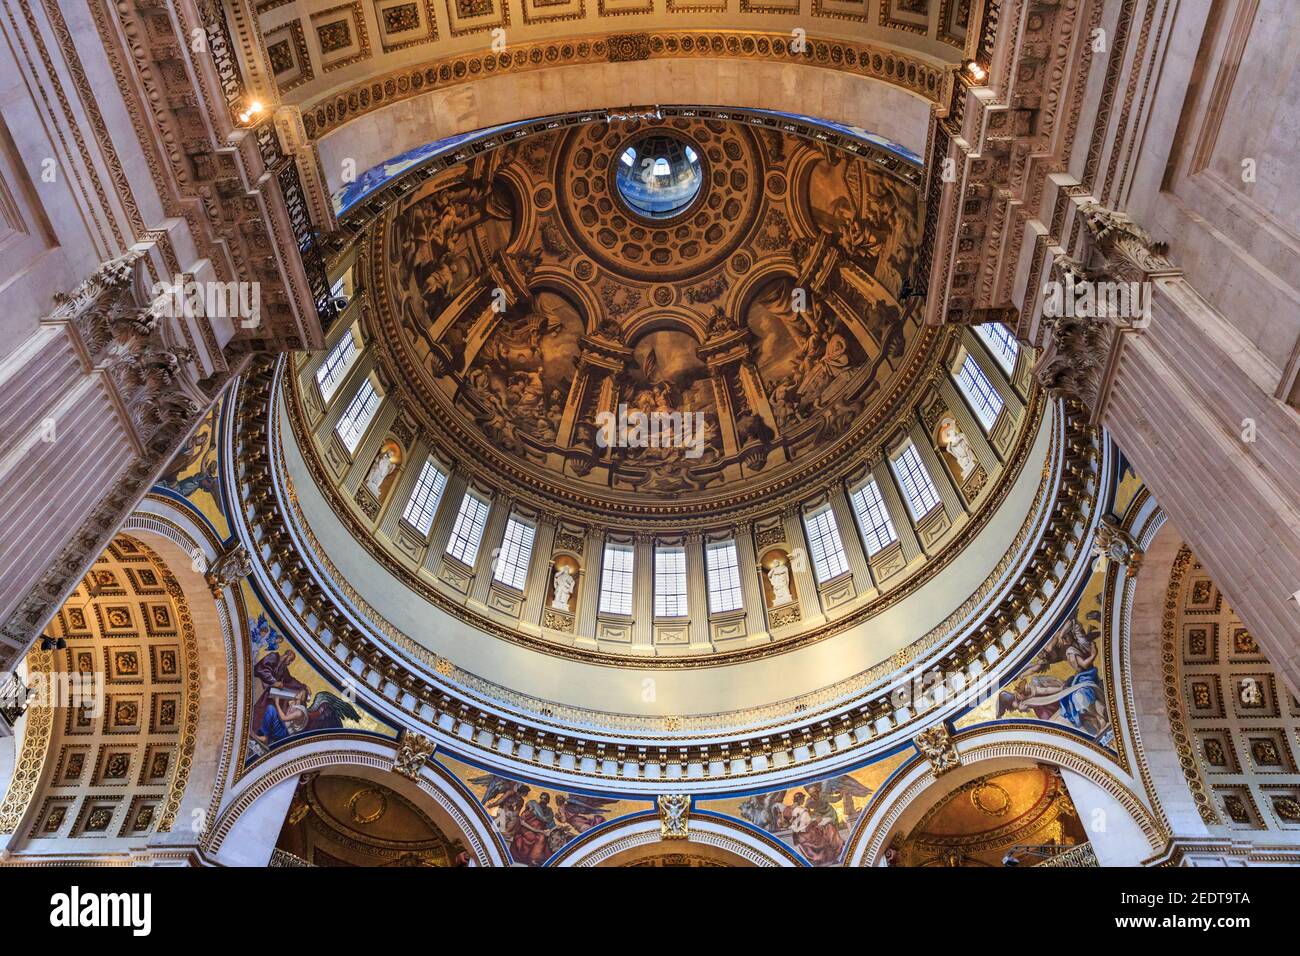 St Paul's Cathedral interior, view up to inner dome ceiling decoration and paintings by Sir James Thornhill,  London, England Stock Photo